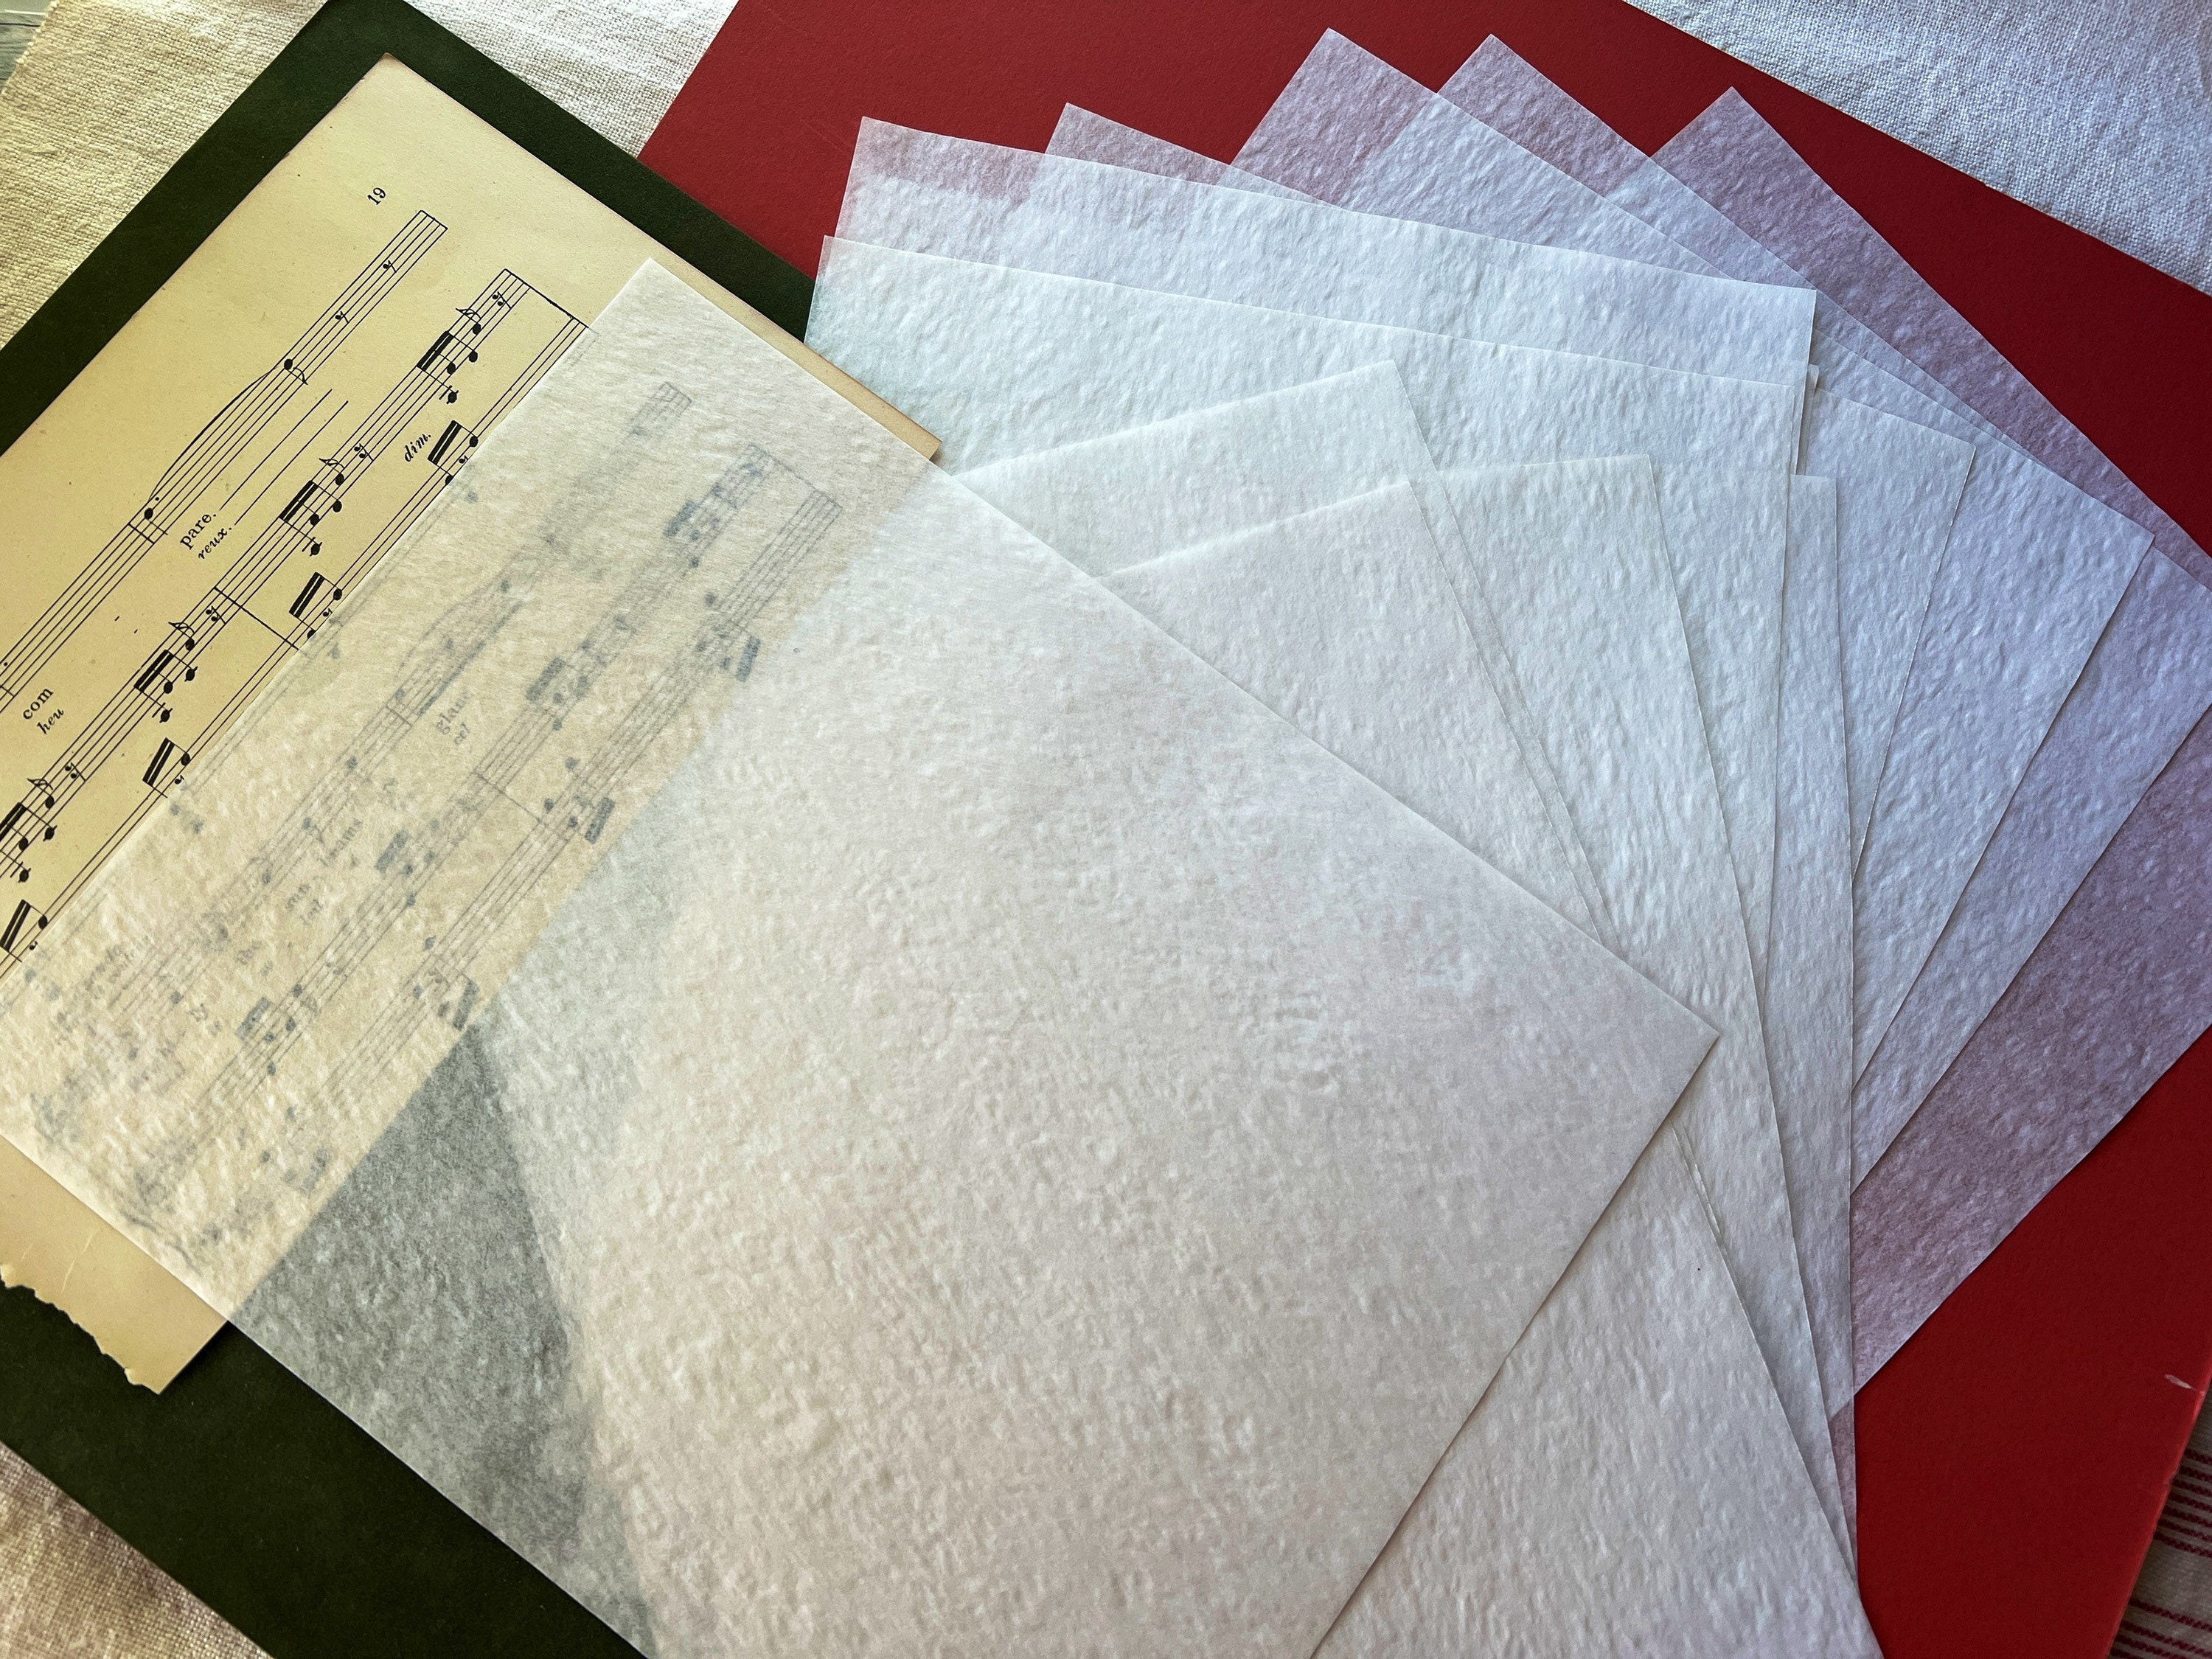 100 Sheets of Vintage Typing Paper Onionskin, Bond and Manifold